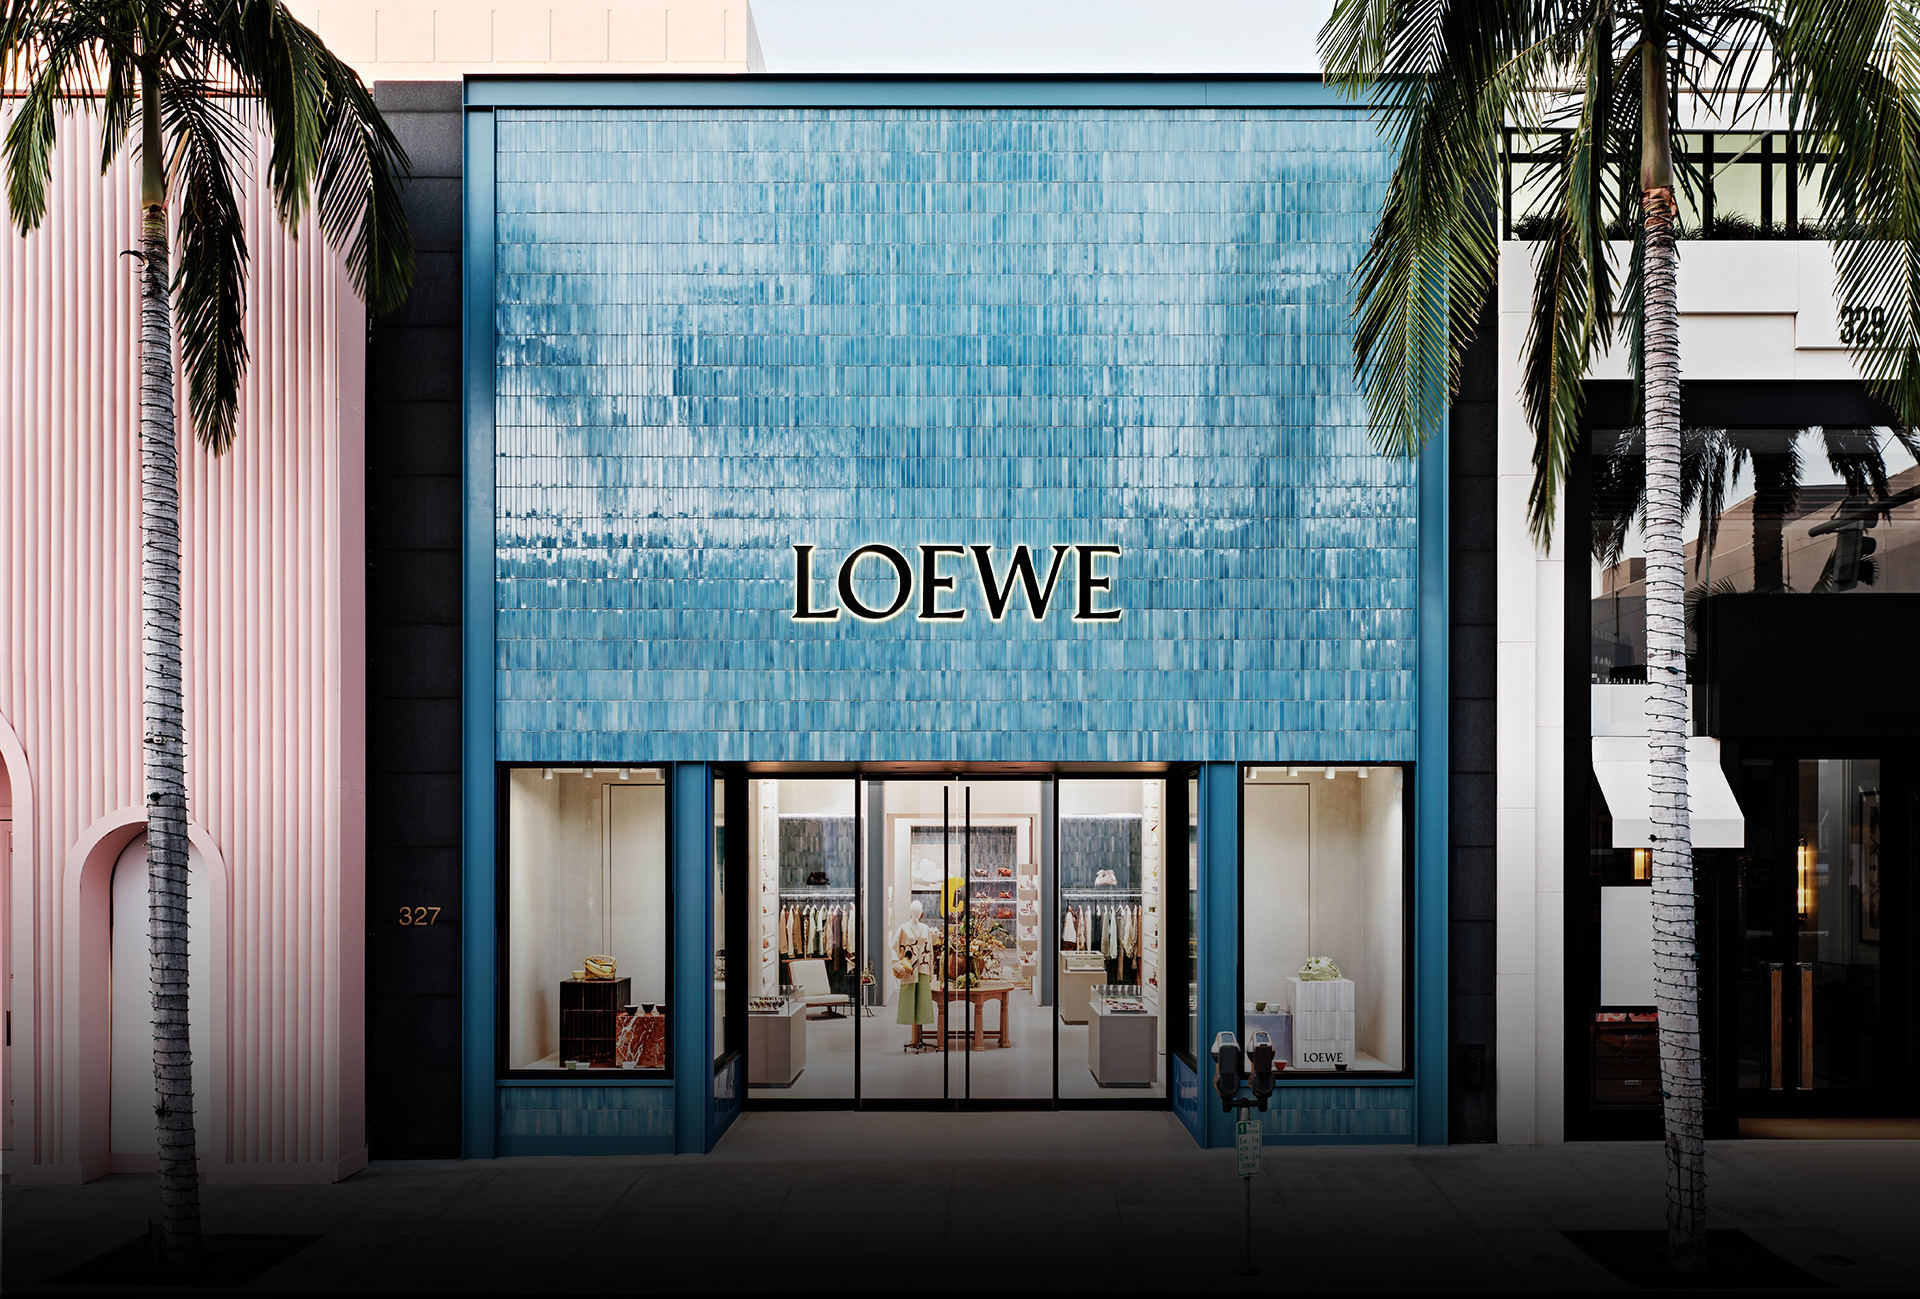 LOEWE's new collection inspired in chinese monochrome ceramics